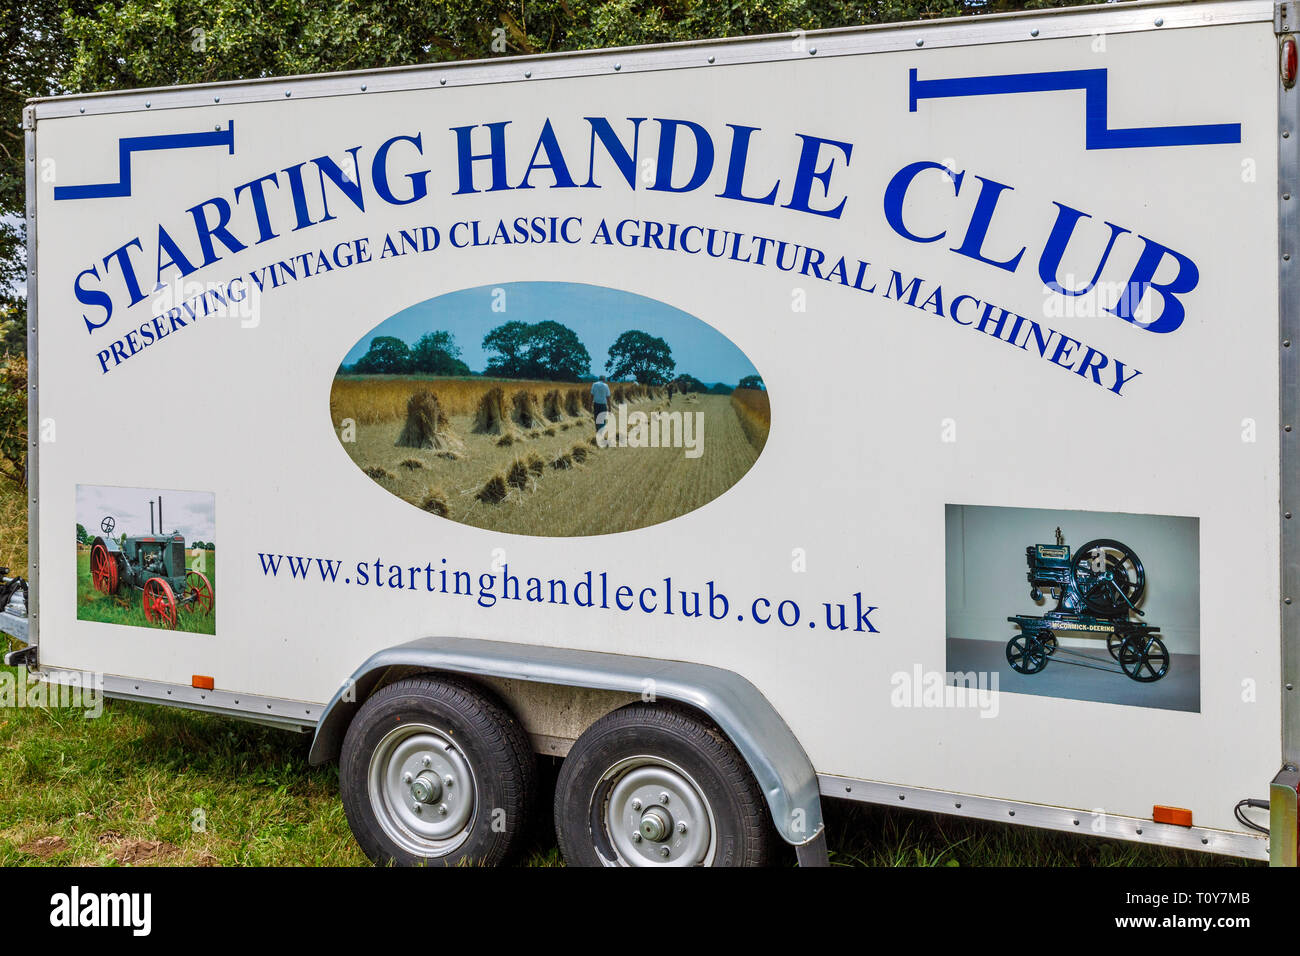 The equipment trailer for the Starting Handle Club parked at the 2018 Aylsham Agricultural Show, Norfolk, UK. Stock Photo